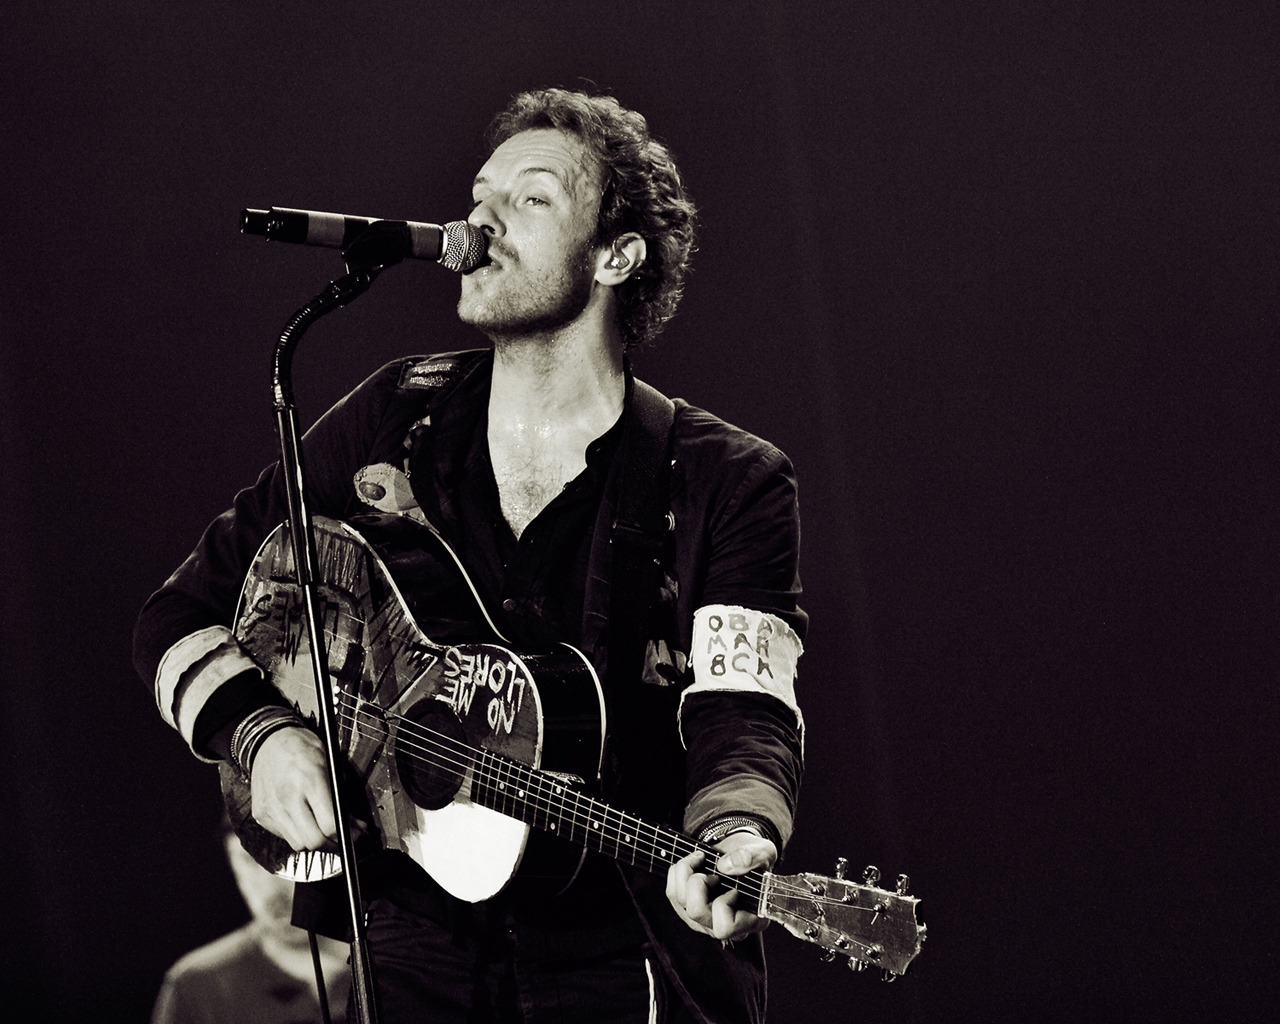 Chris Martin Coldplay for 1280 x 1024 resolution